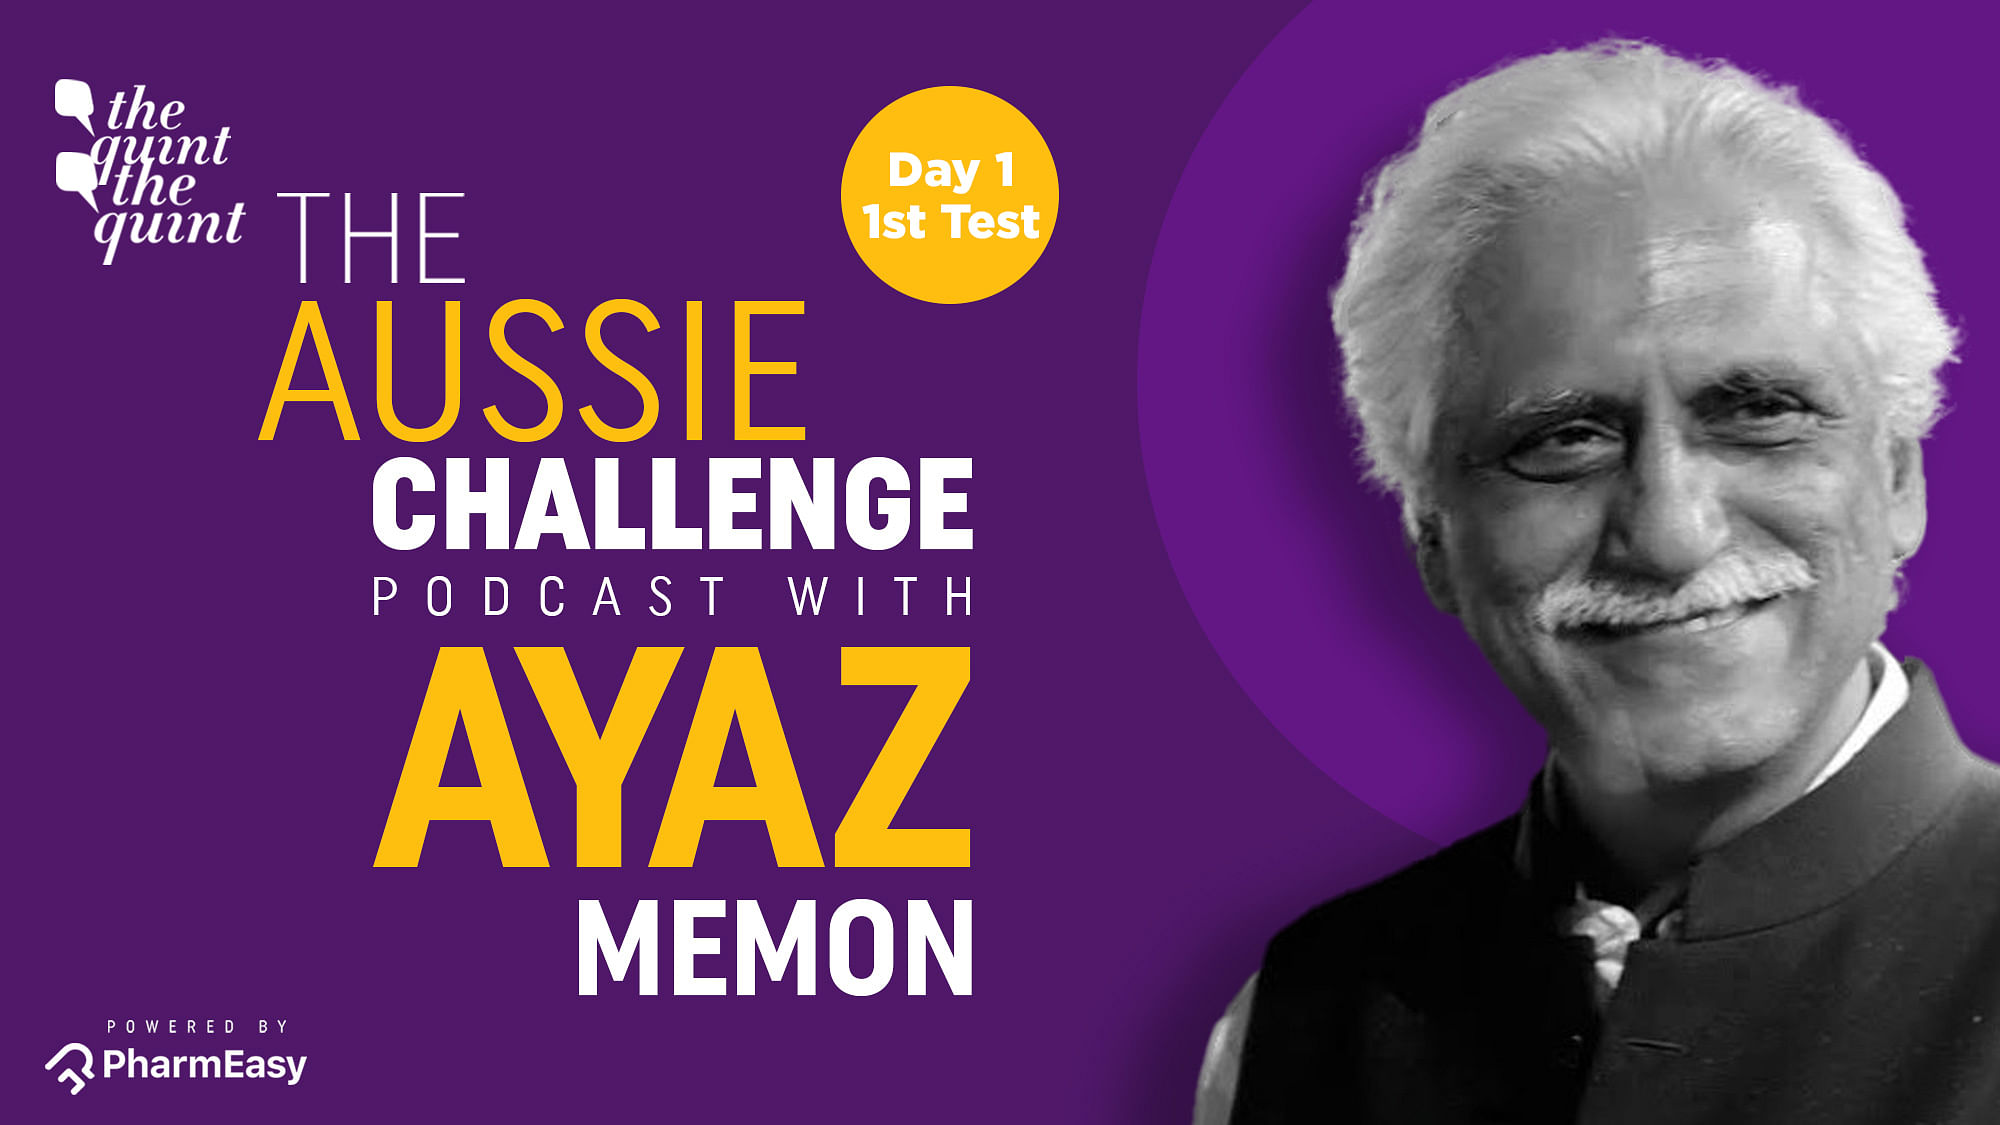 On Episode 7 of The Aussie Challenge podcast, Ayaz Memon discusses Day 1 of the India vs Australia Test series-opener in Adelaide on Thursday.